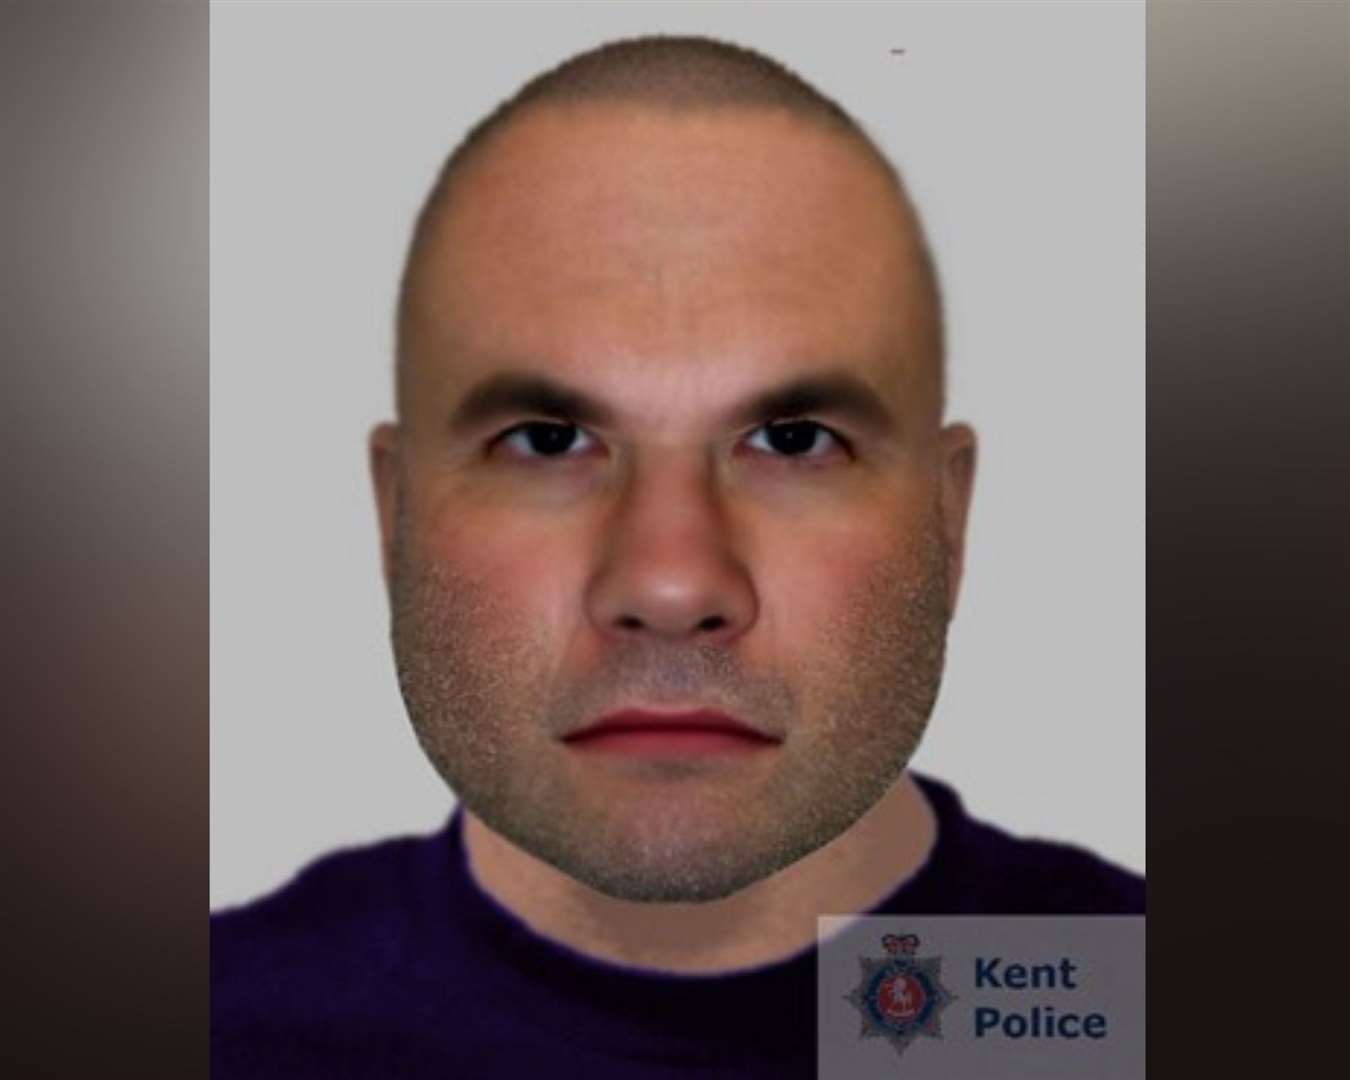 An e-fit of the person police would like to interview